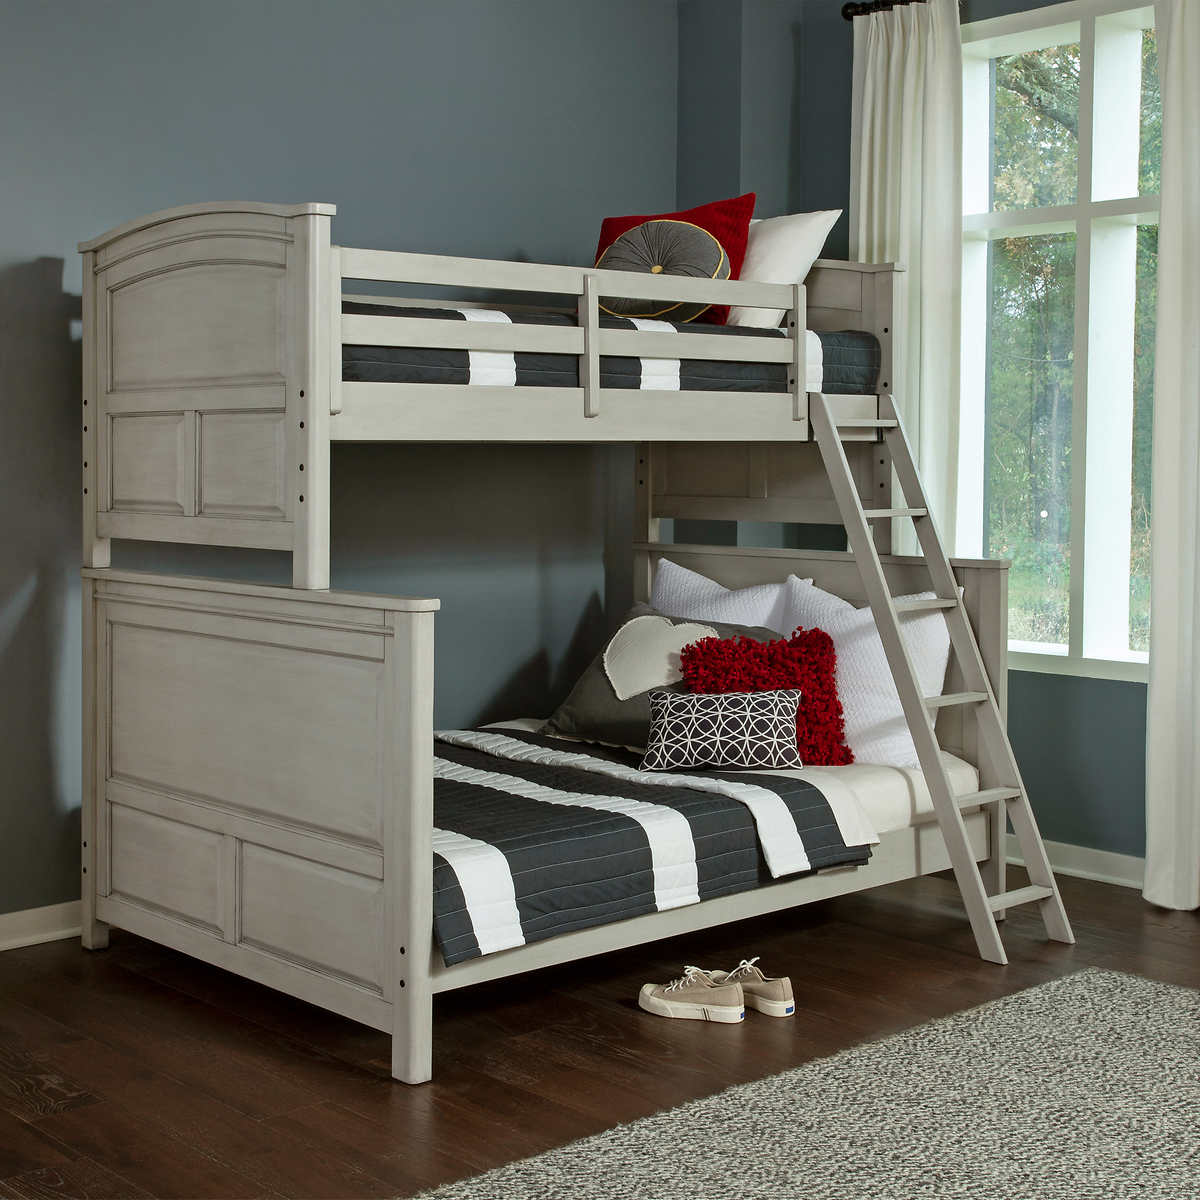 Wingate Twin Over Double Bunk Costco, Twin Beds That Can Convert To Bunk